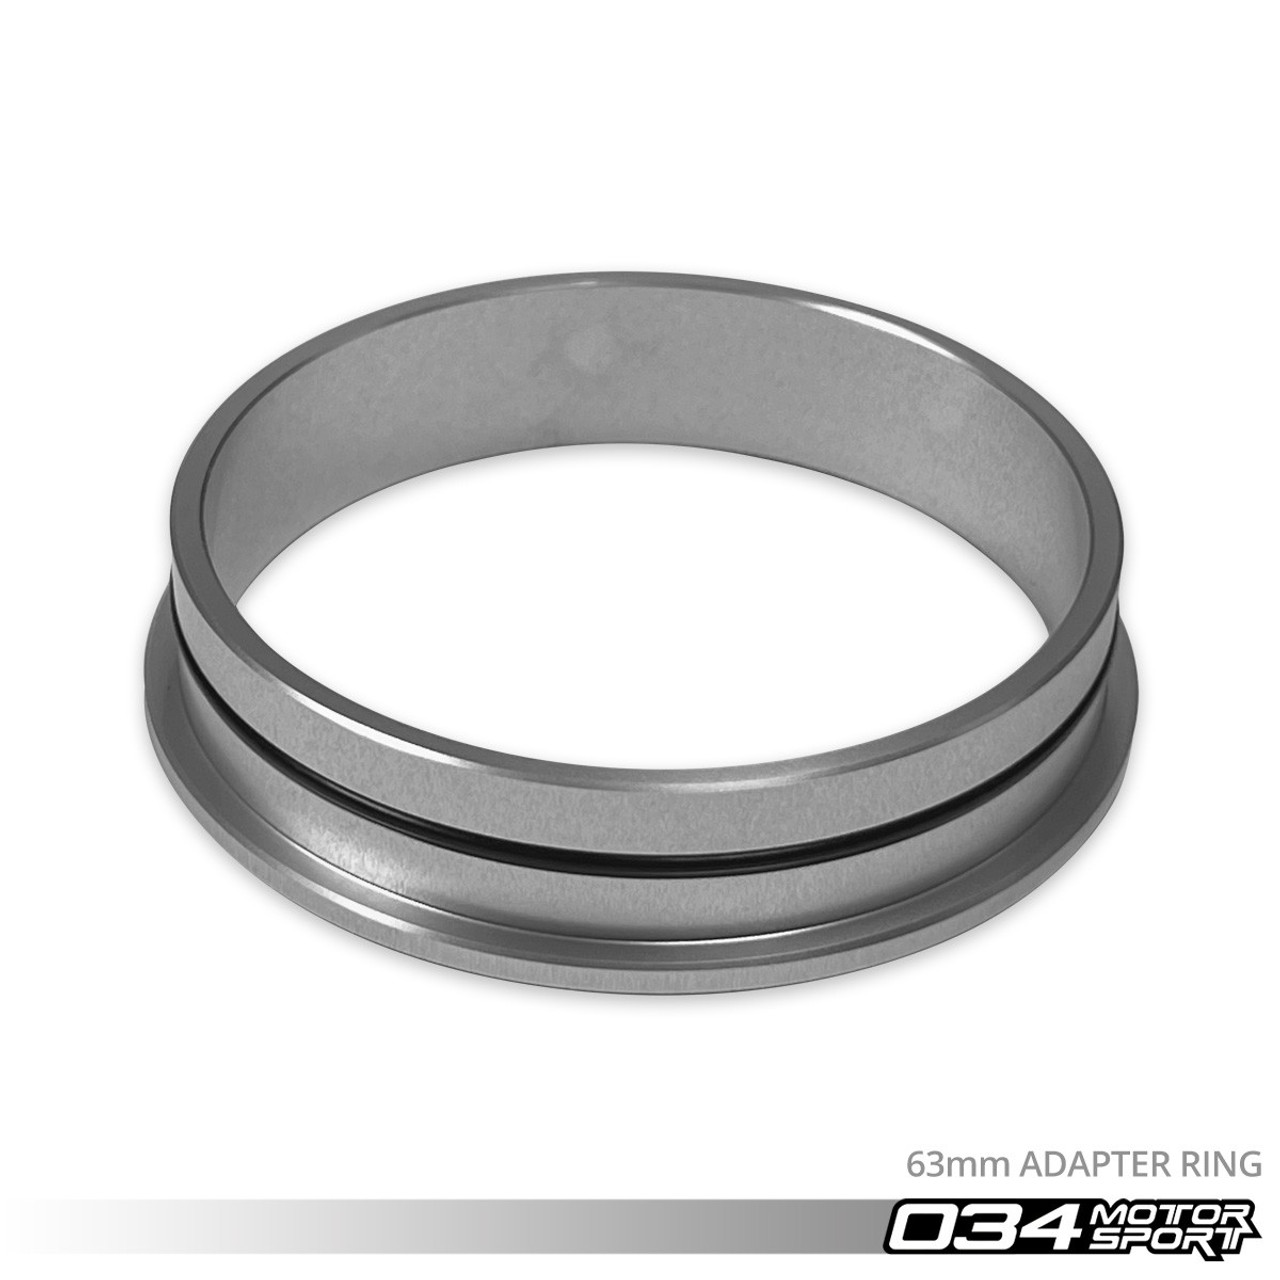 034Motorsport Turbo Inlet Adapter Rings for B9 3.0T